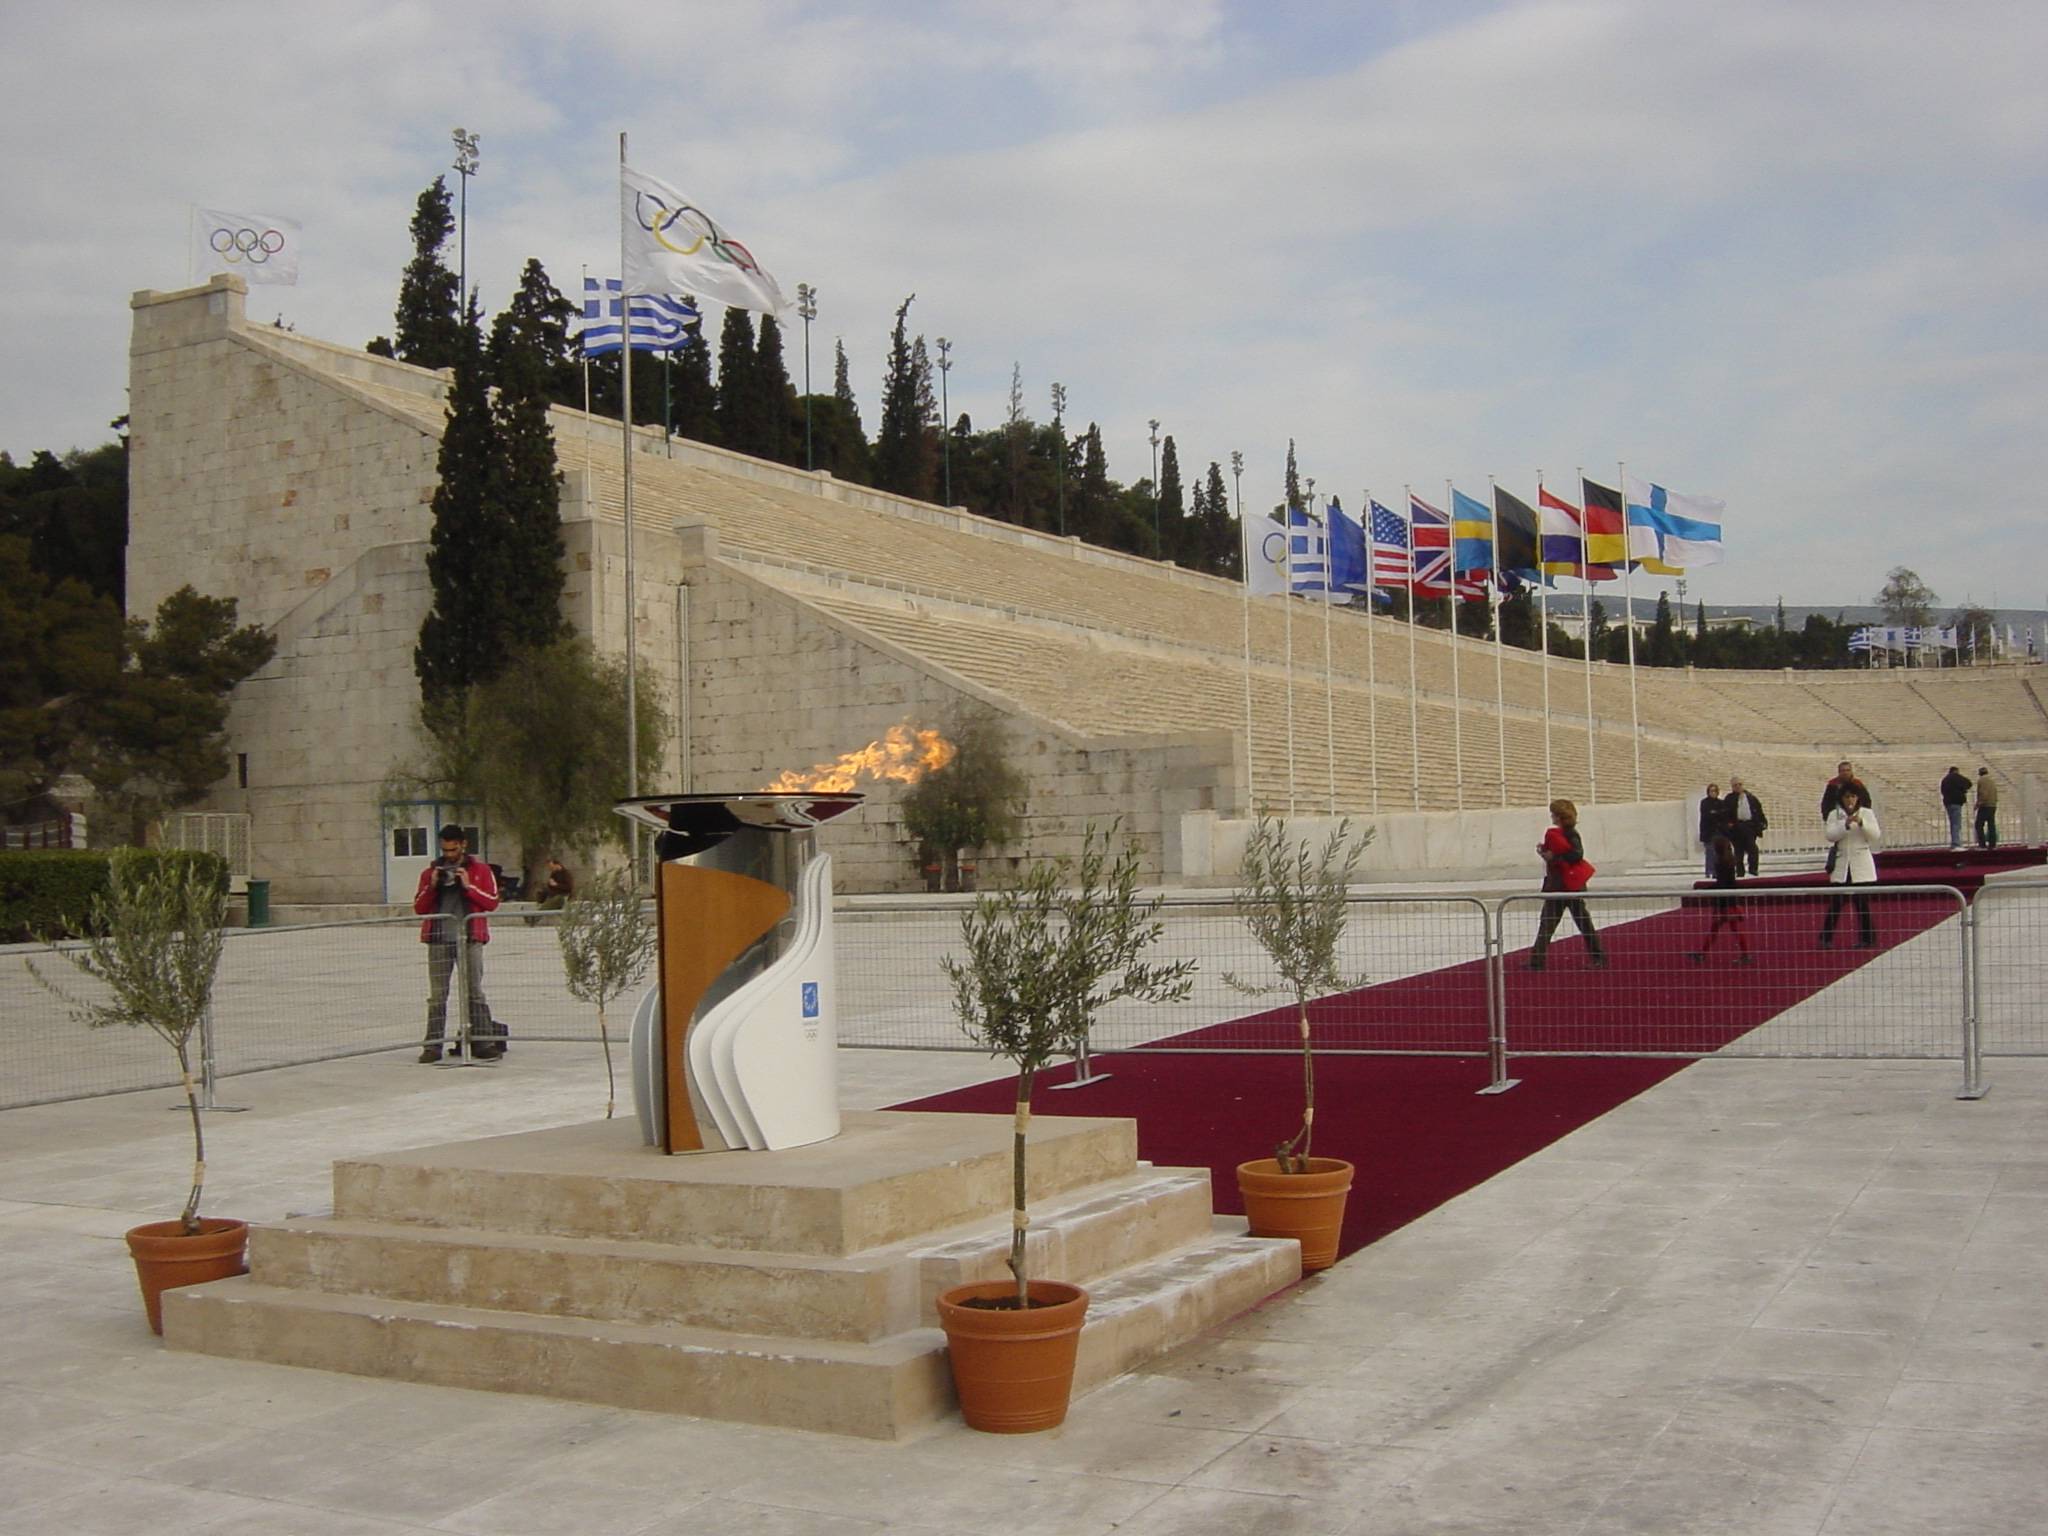 Olympic fire in Athens, Greece